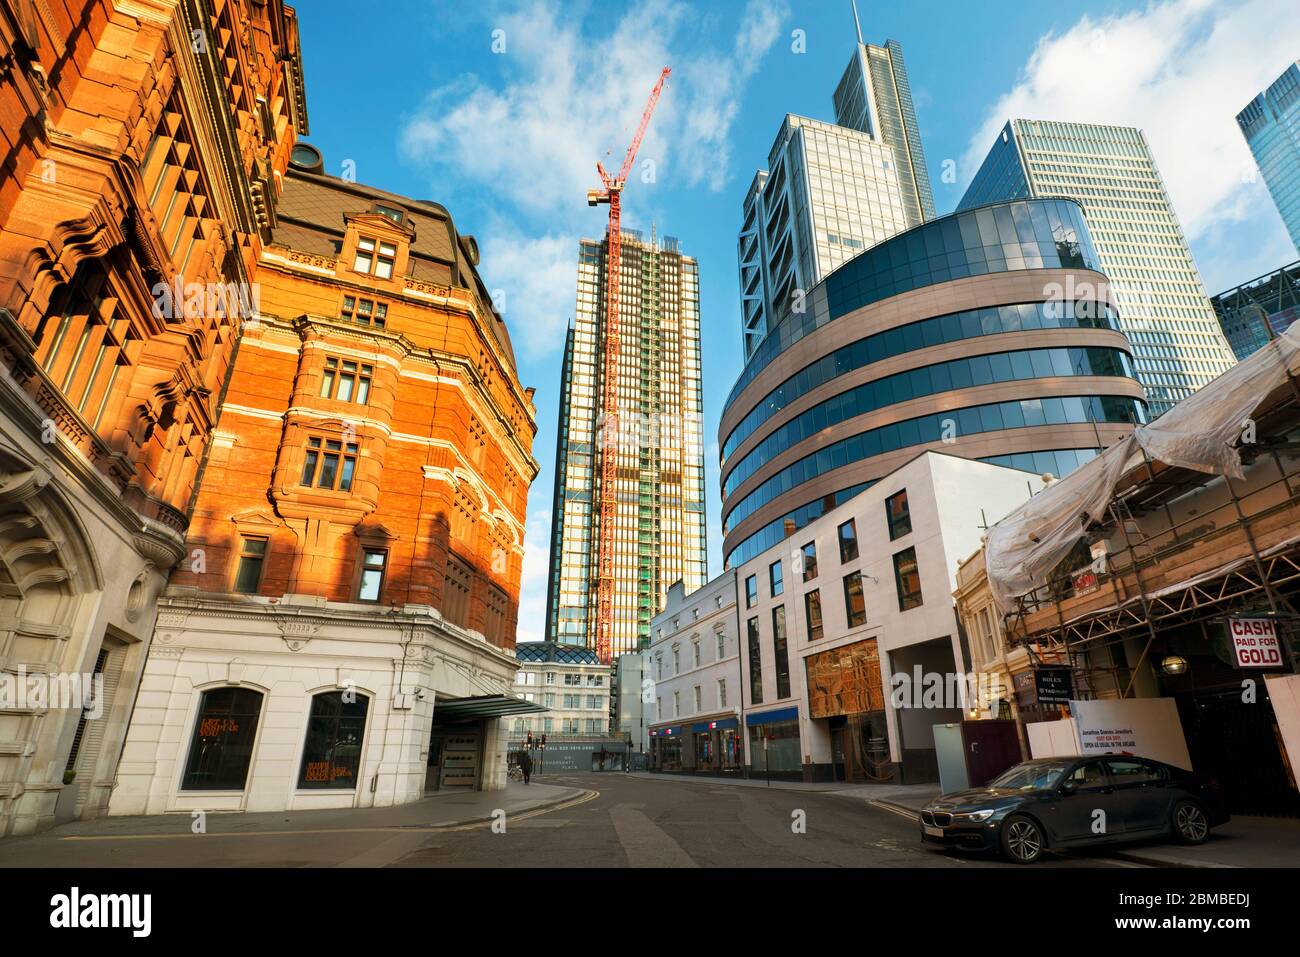 The deserted Liverpool Street during the pandemic with Hotel Andaz (left) and co-working office buildings. Day 7 of the lockdown, London, Mar 2020 Stock Photo